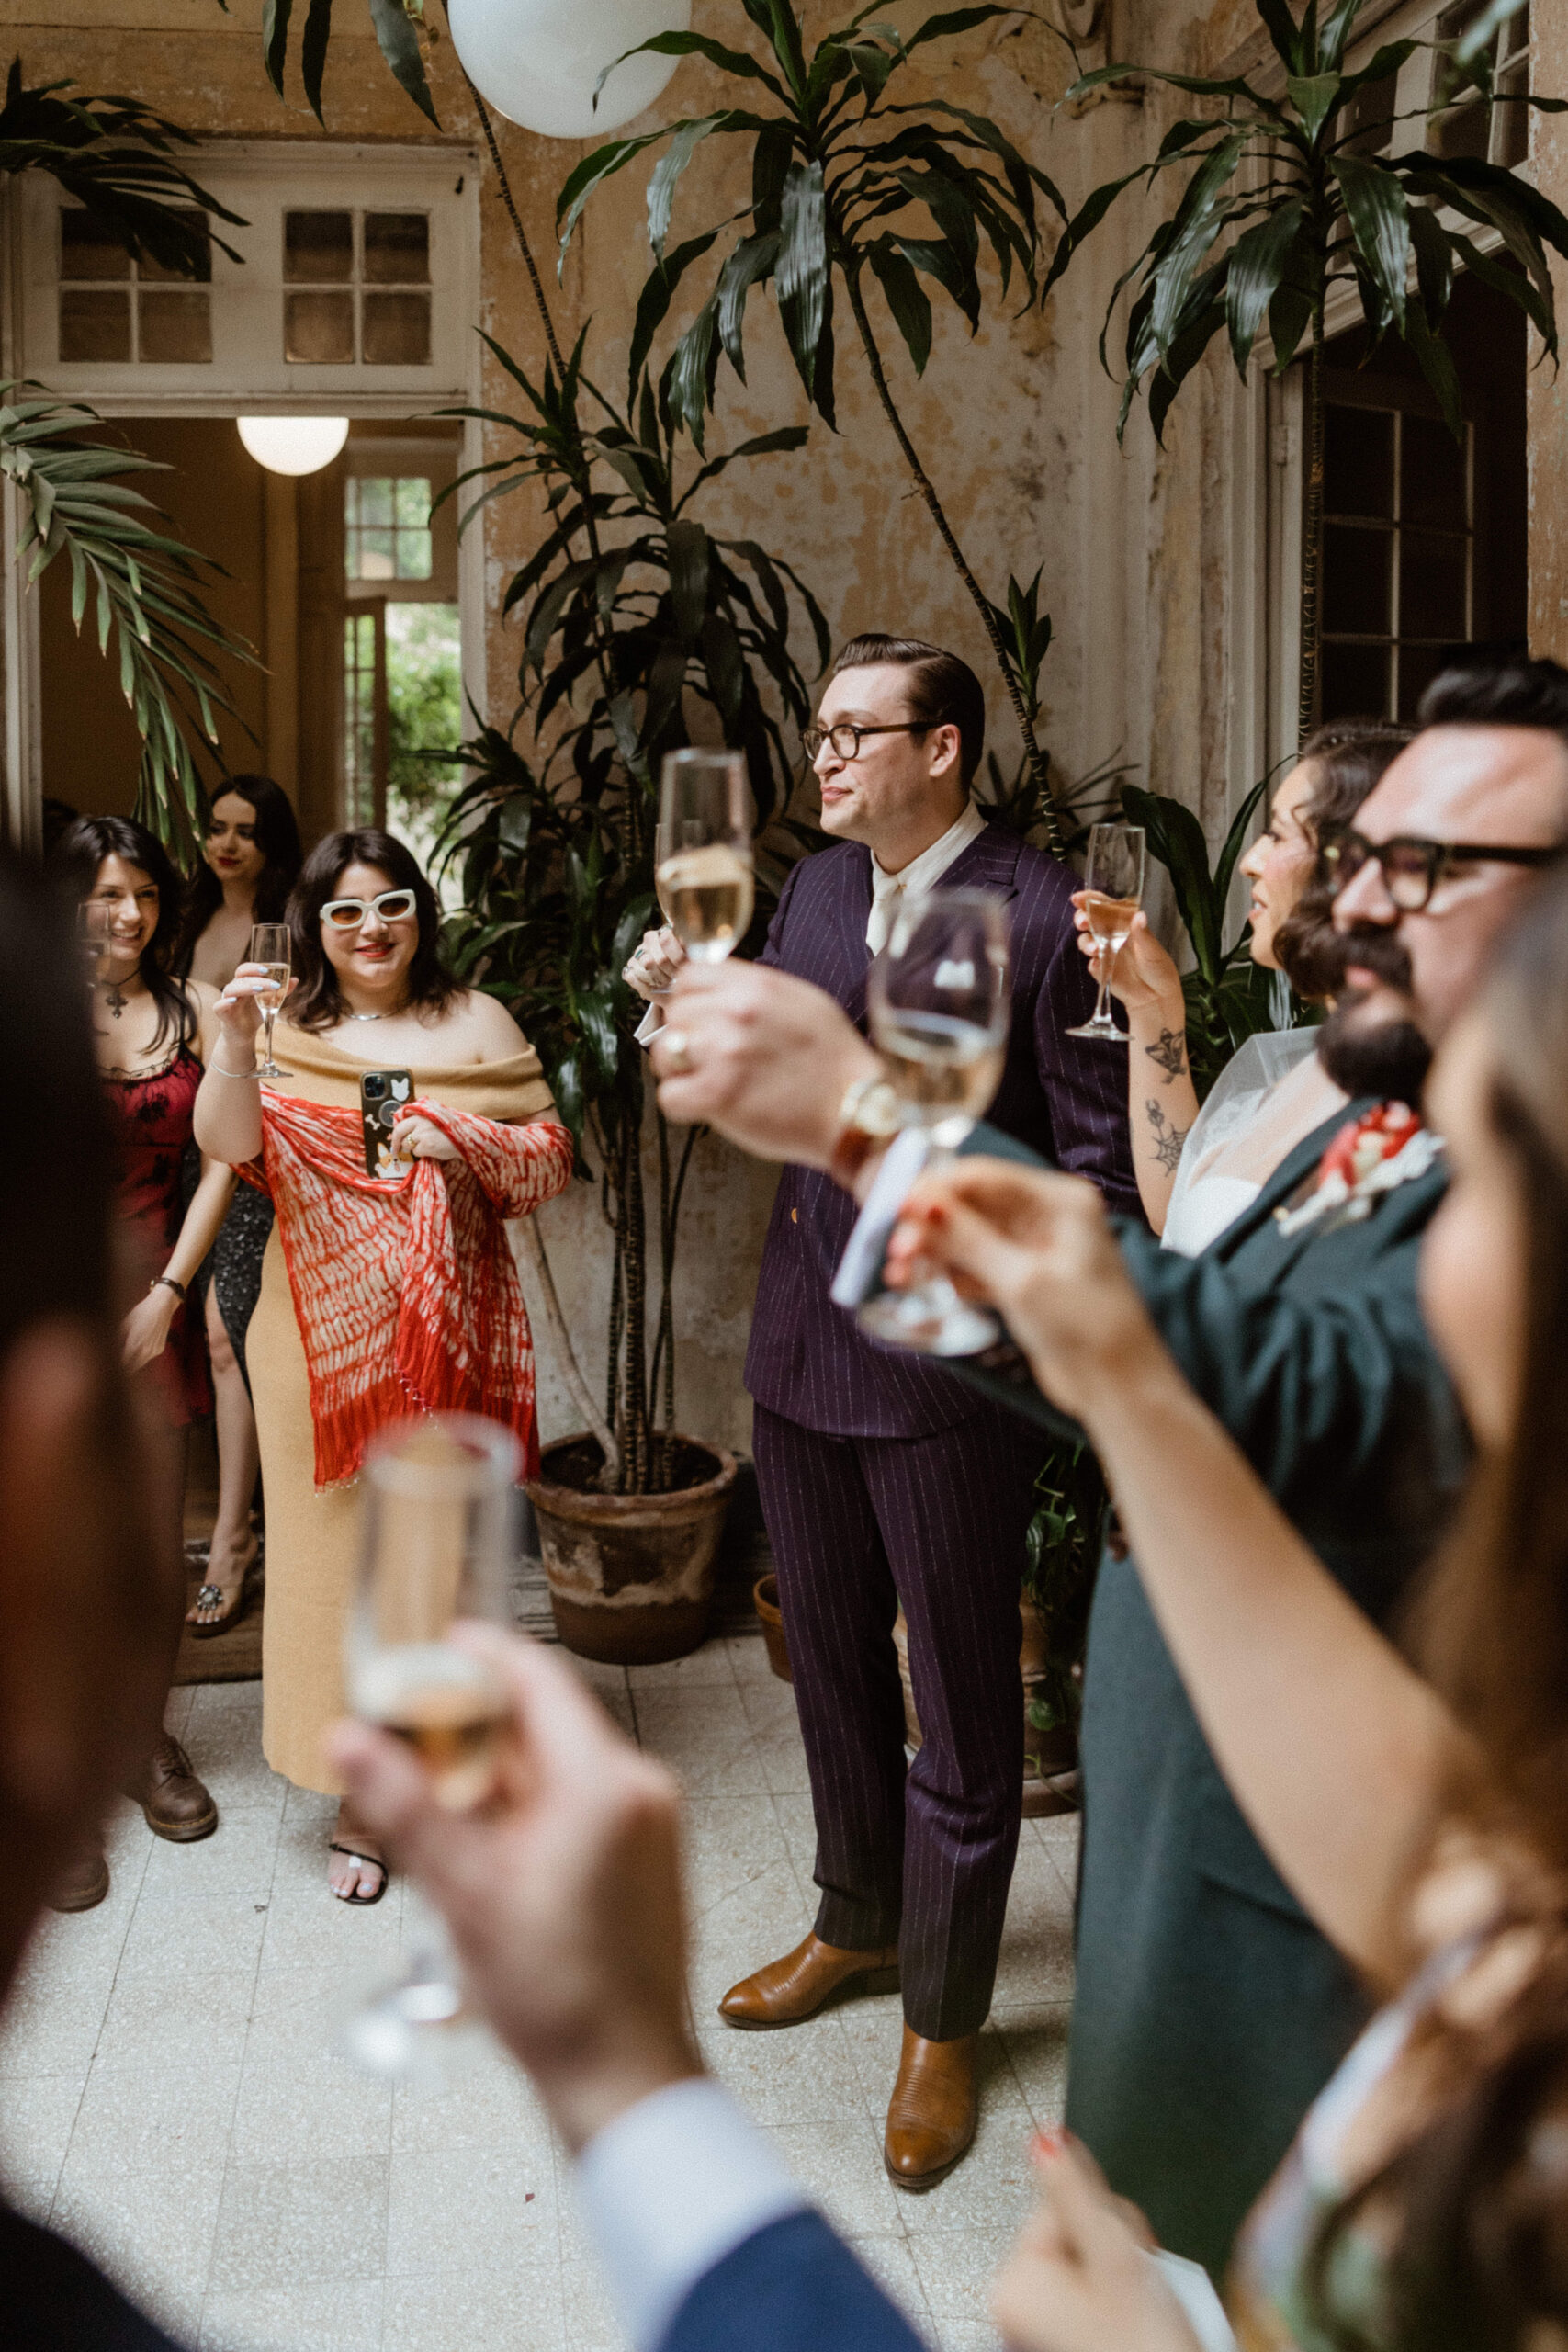 The guests toast the bride and groom during the reception